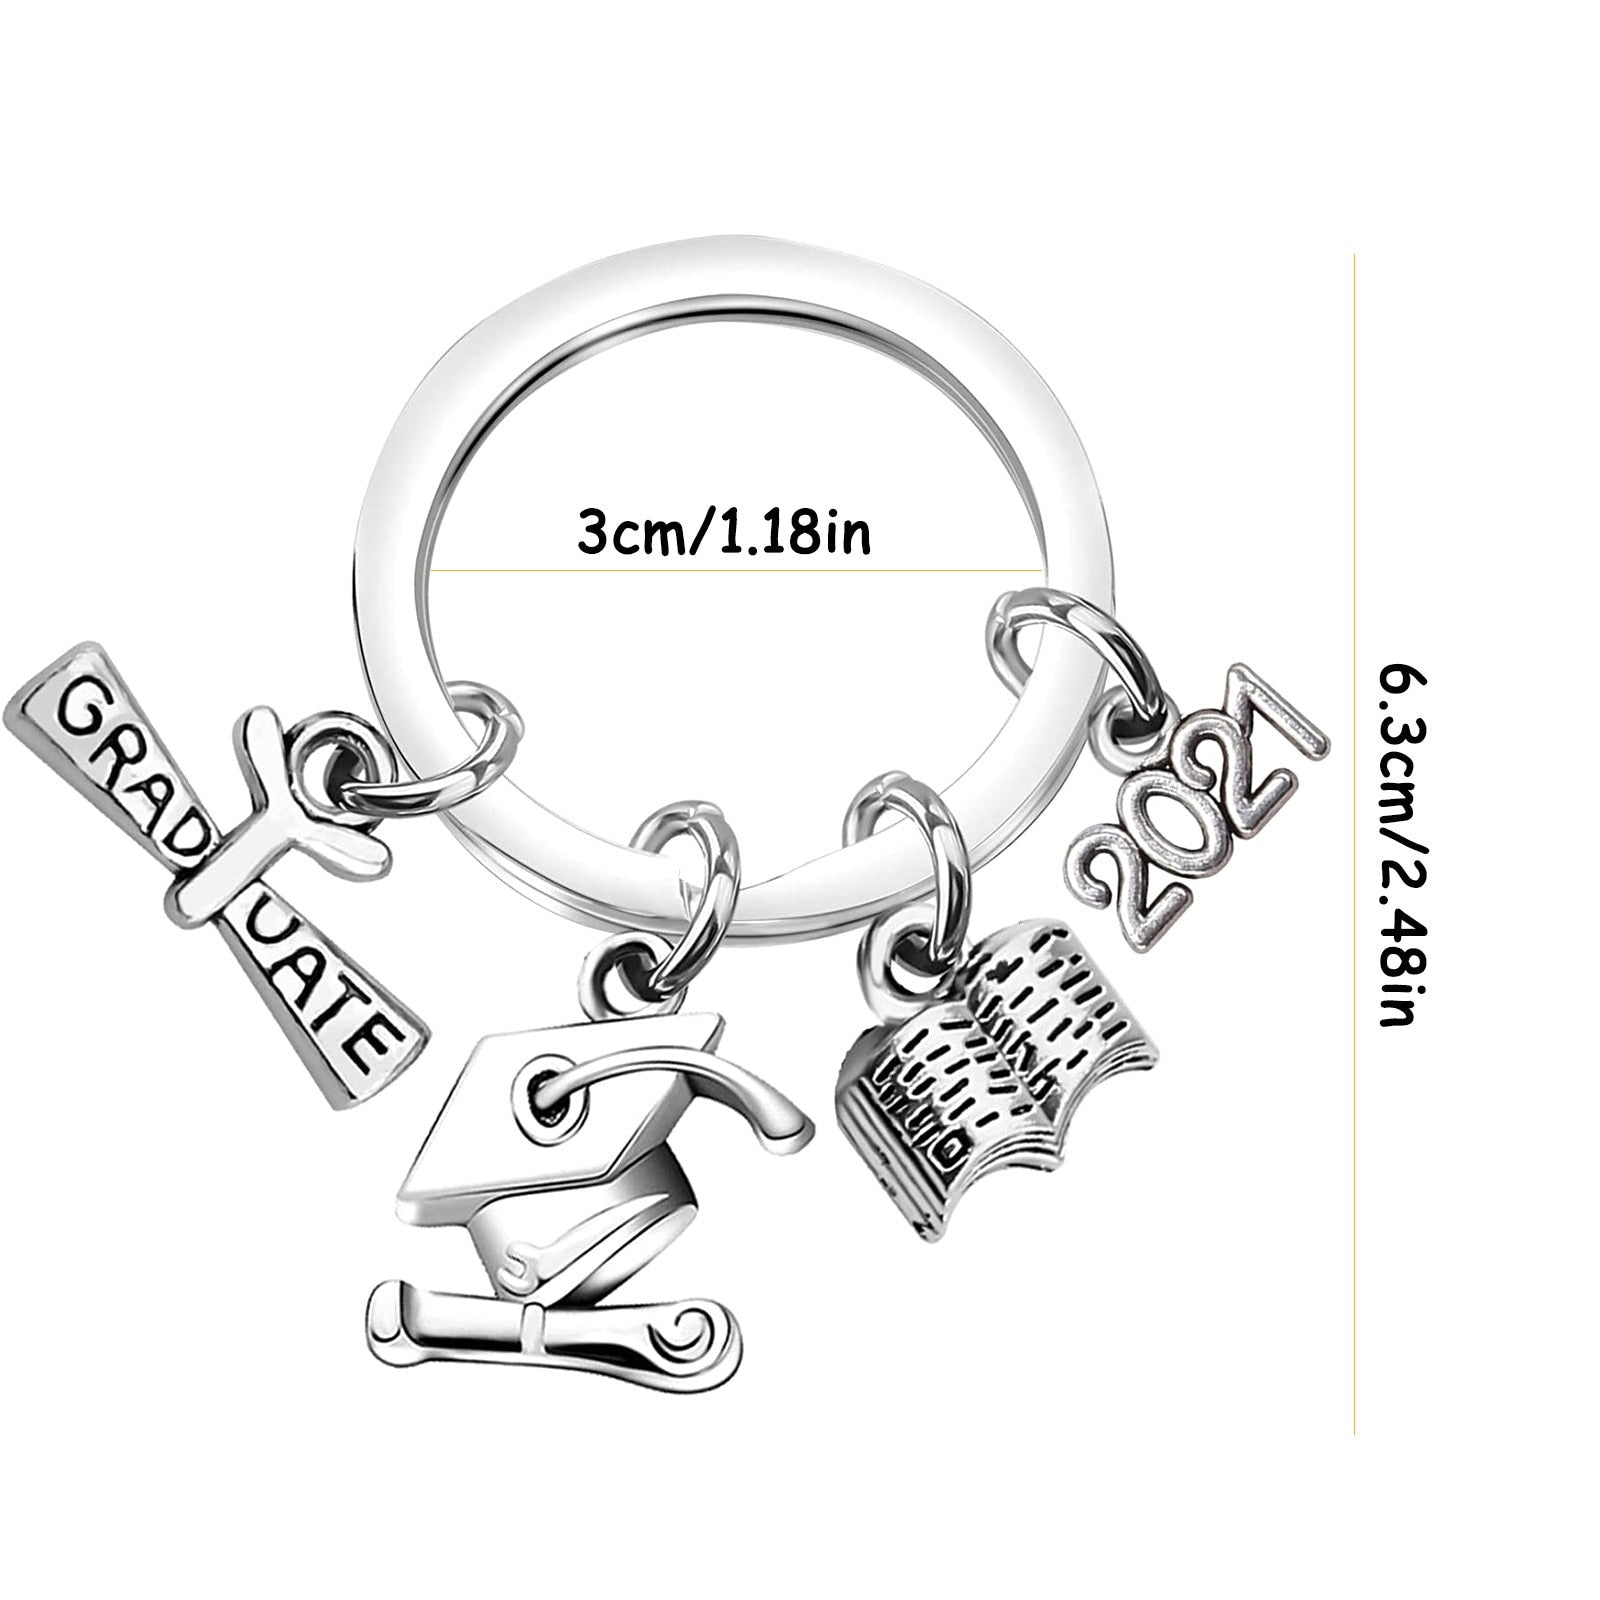 New Class Of 2021 School Keychain Keyring Memorial Graduation Gift Stainless Steel Carry Bag Key Multifunction Key Chain Instock - 200000174 Find Epic Store